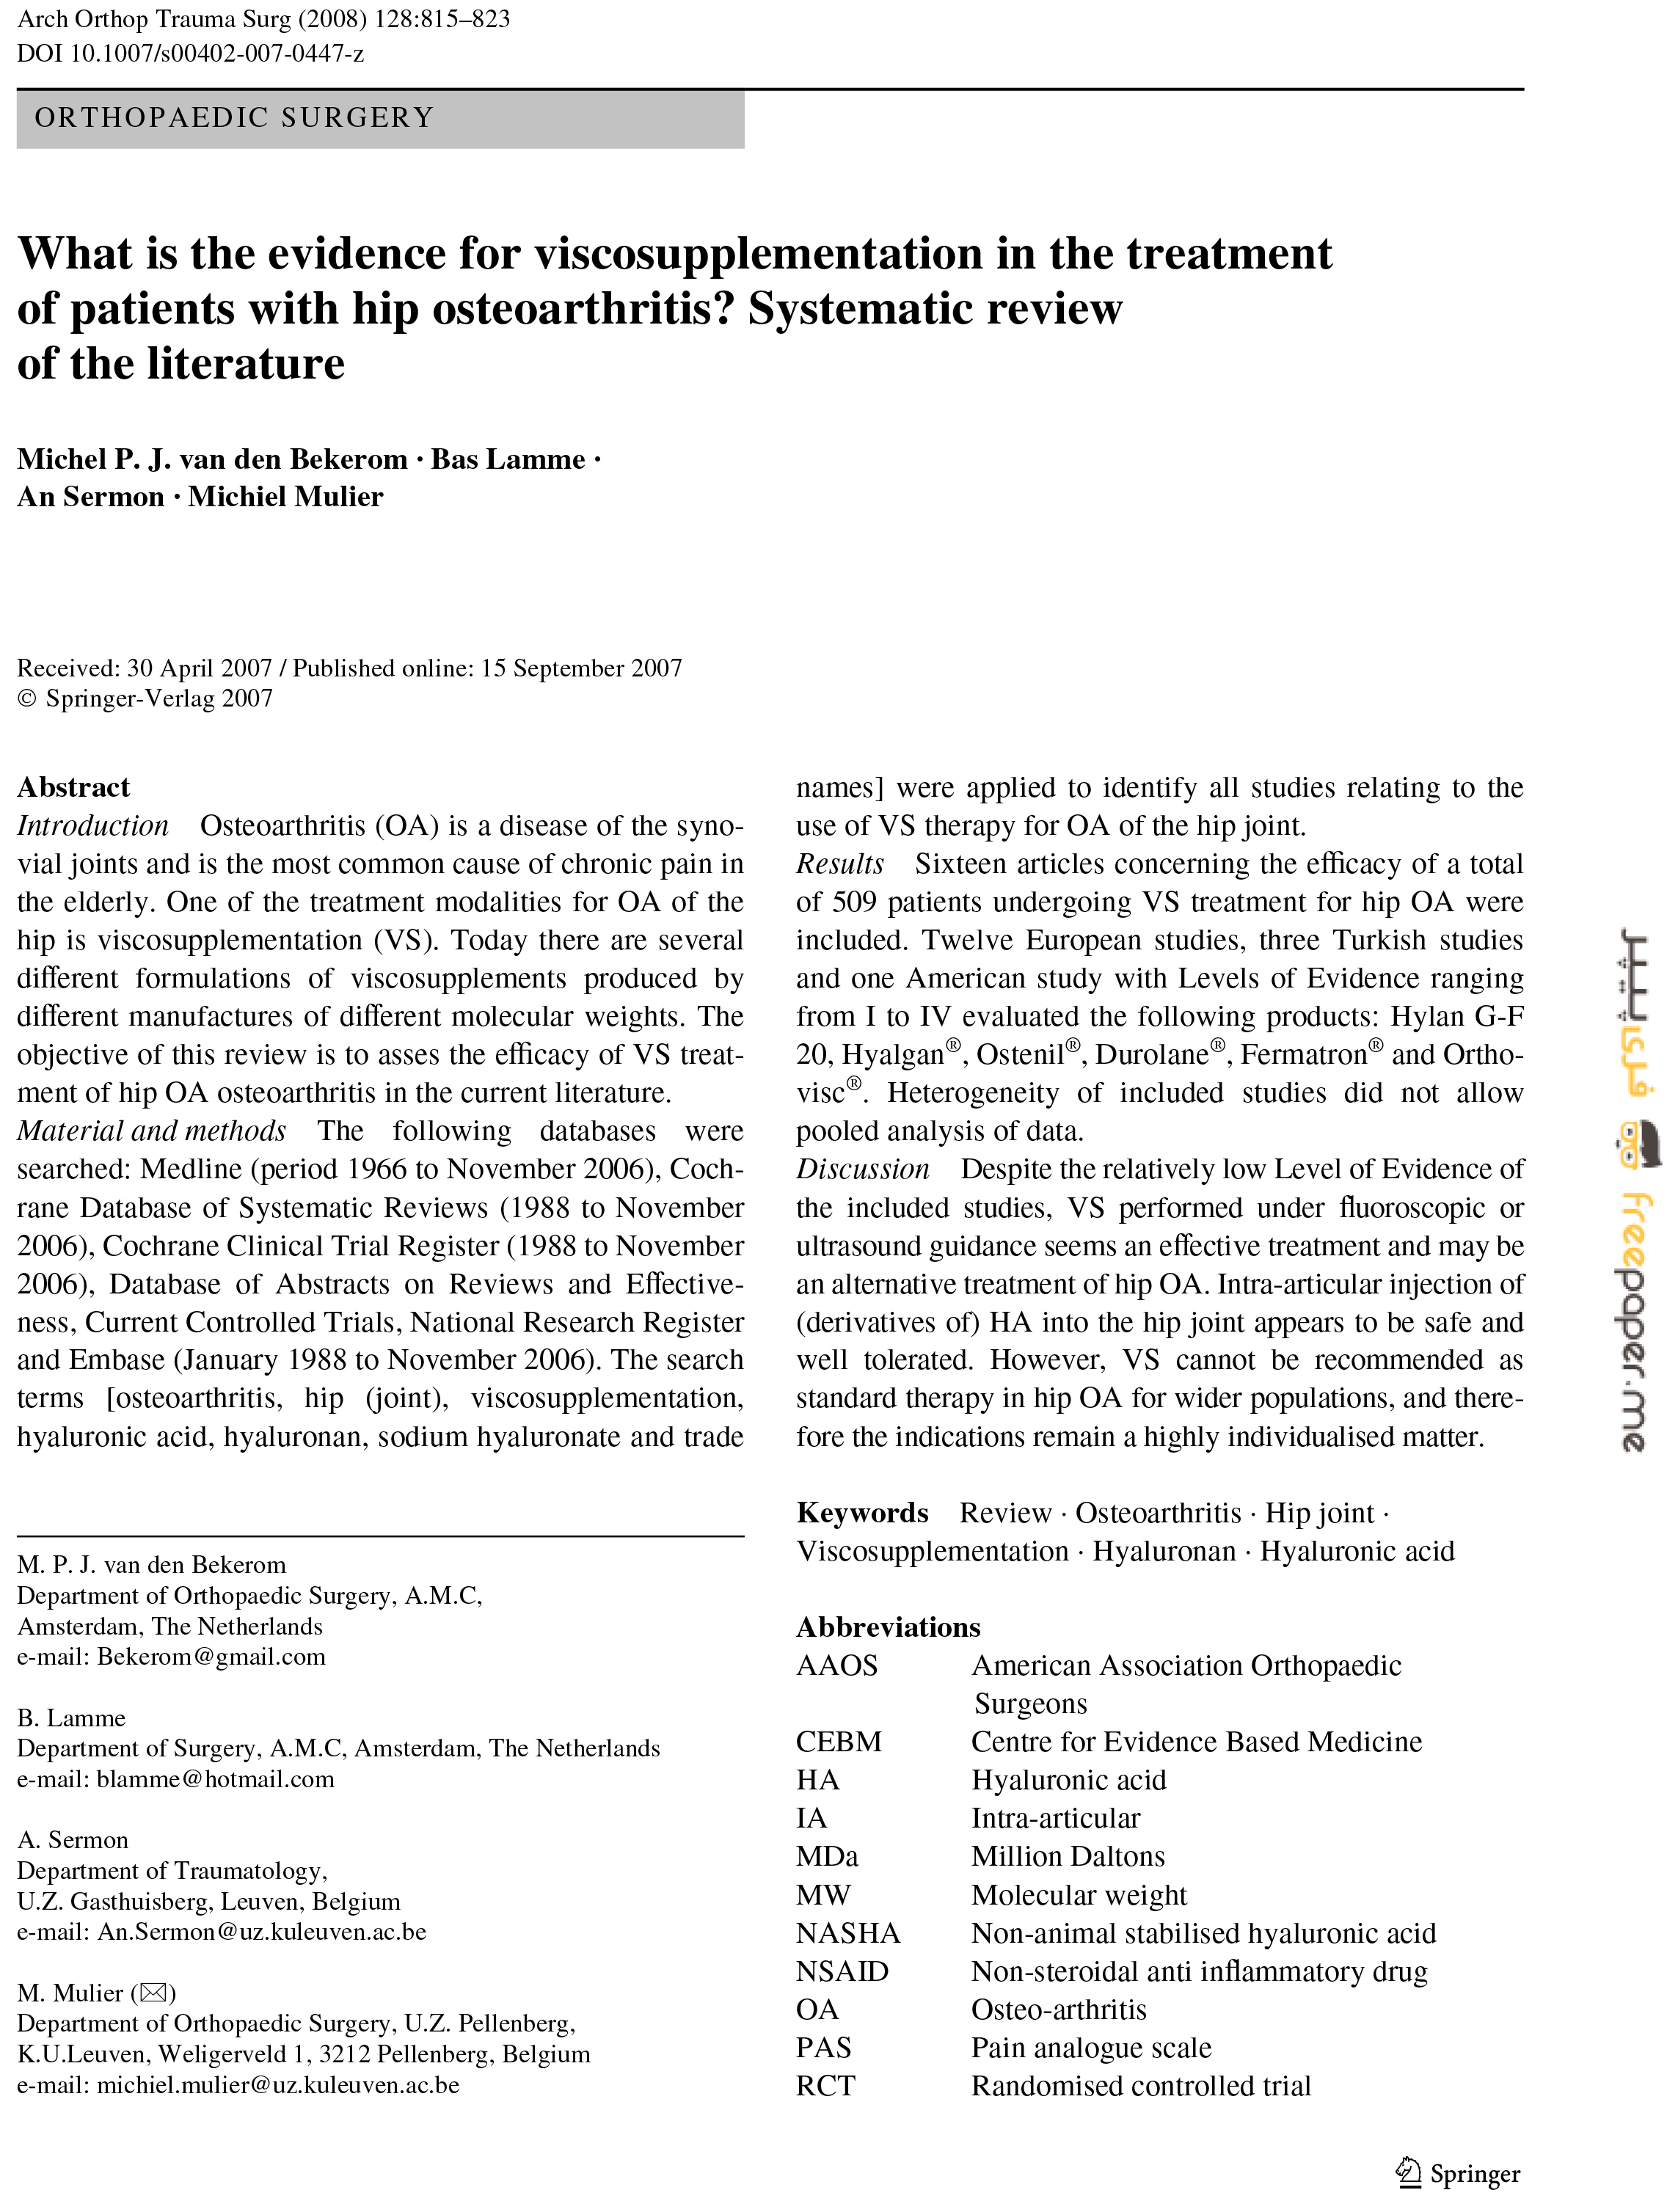 What-is-the-evidence-for-viscosupplementation-in-the-treatment-of-patients-with-hip-osteoarthritis-Systematic-review-of-the-literature-1.jpg